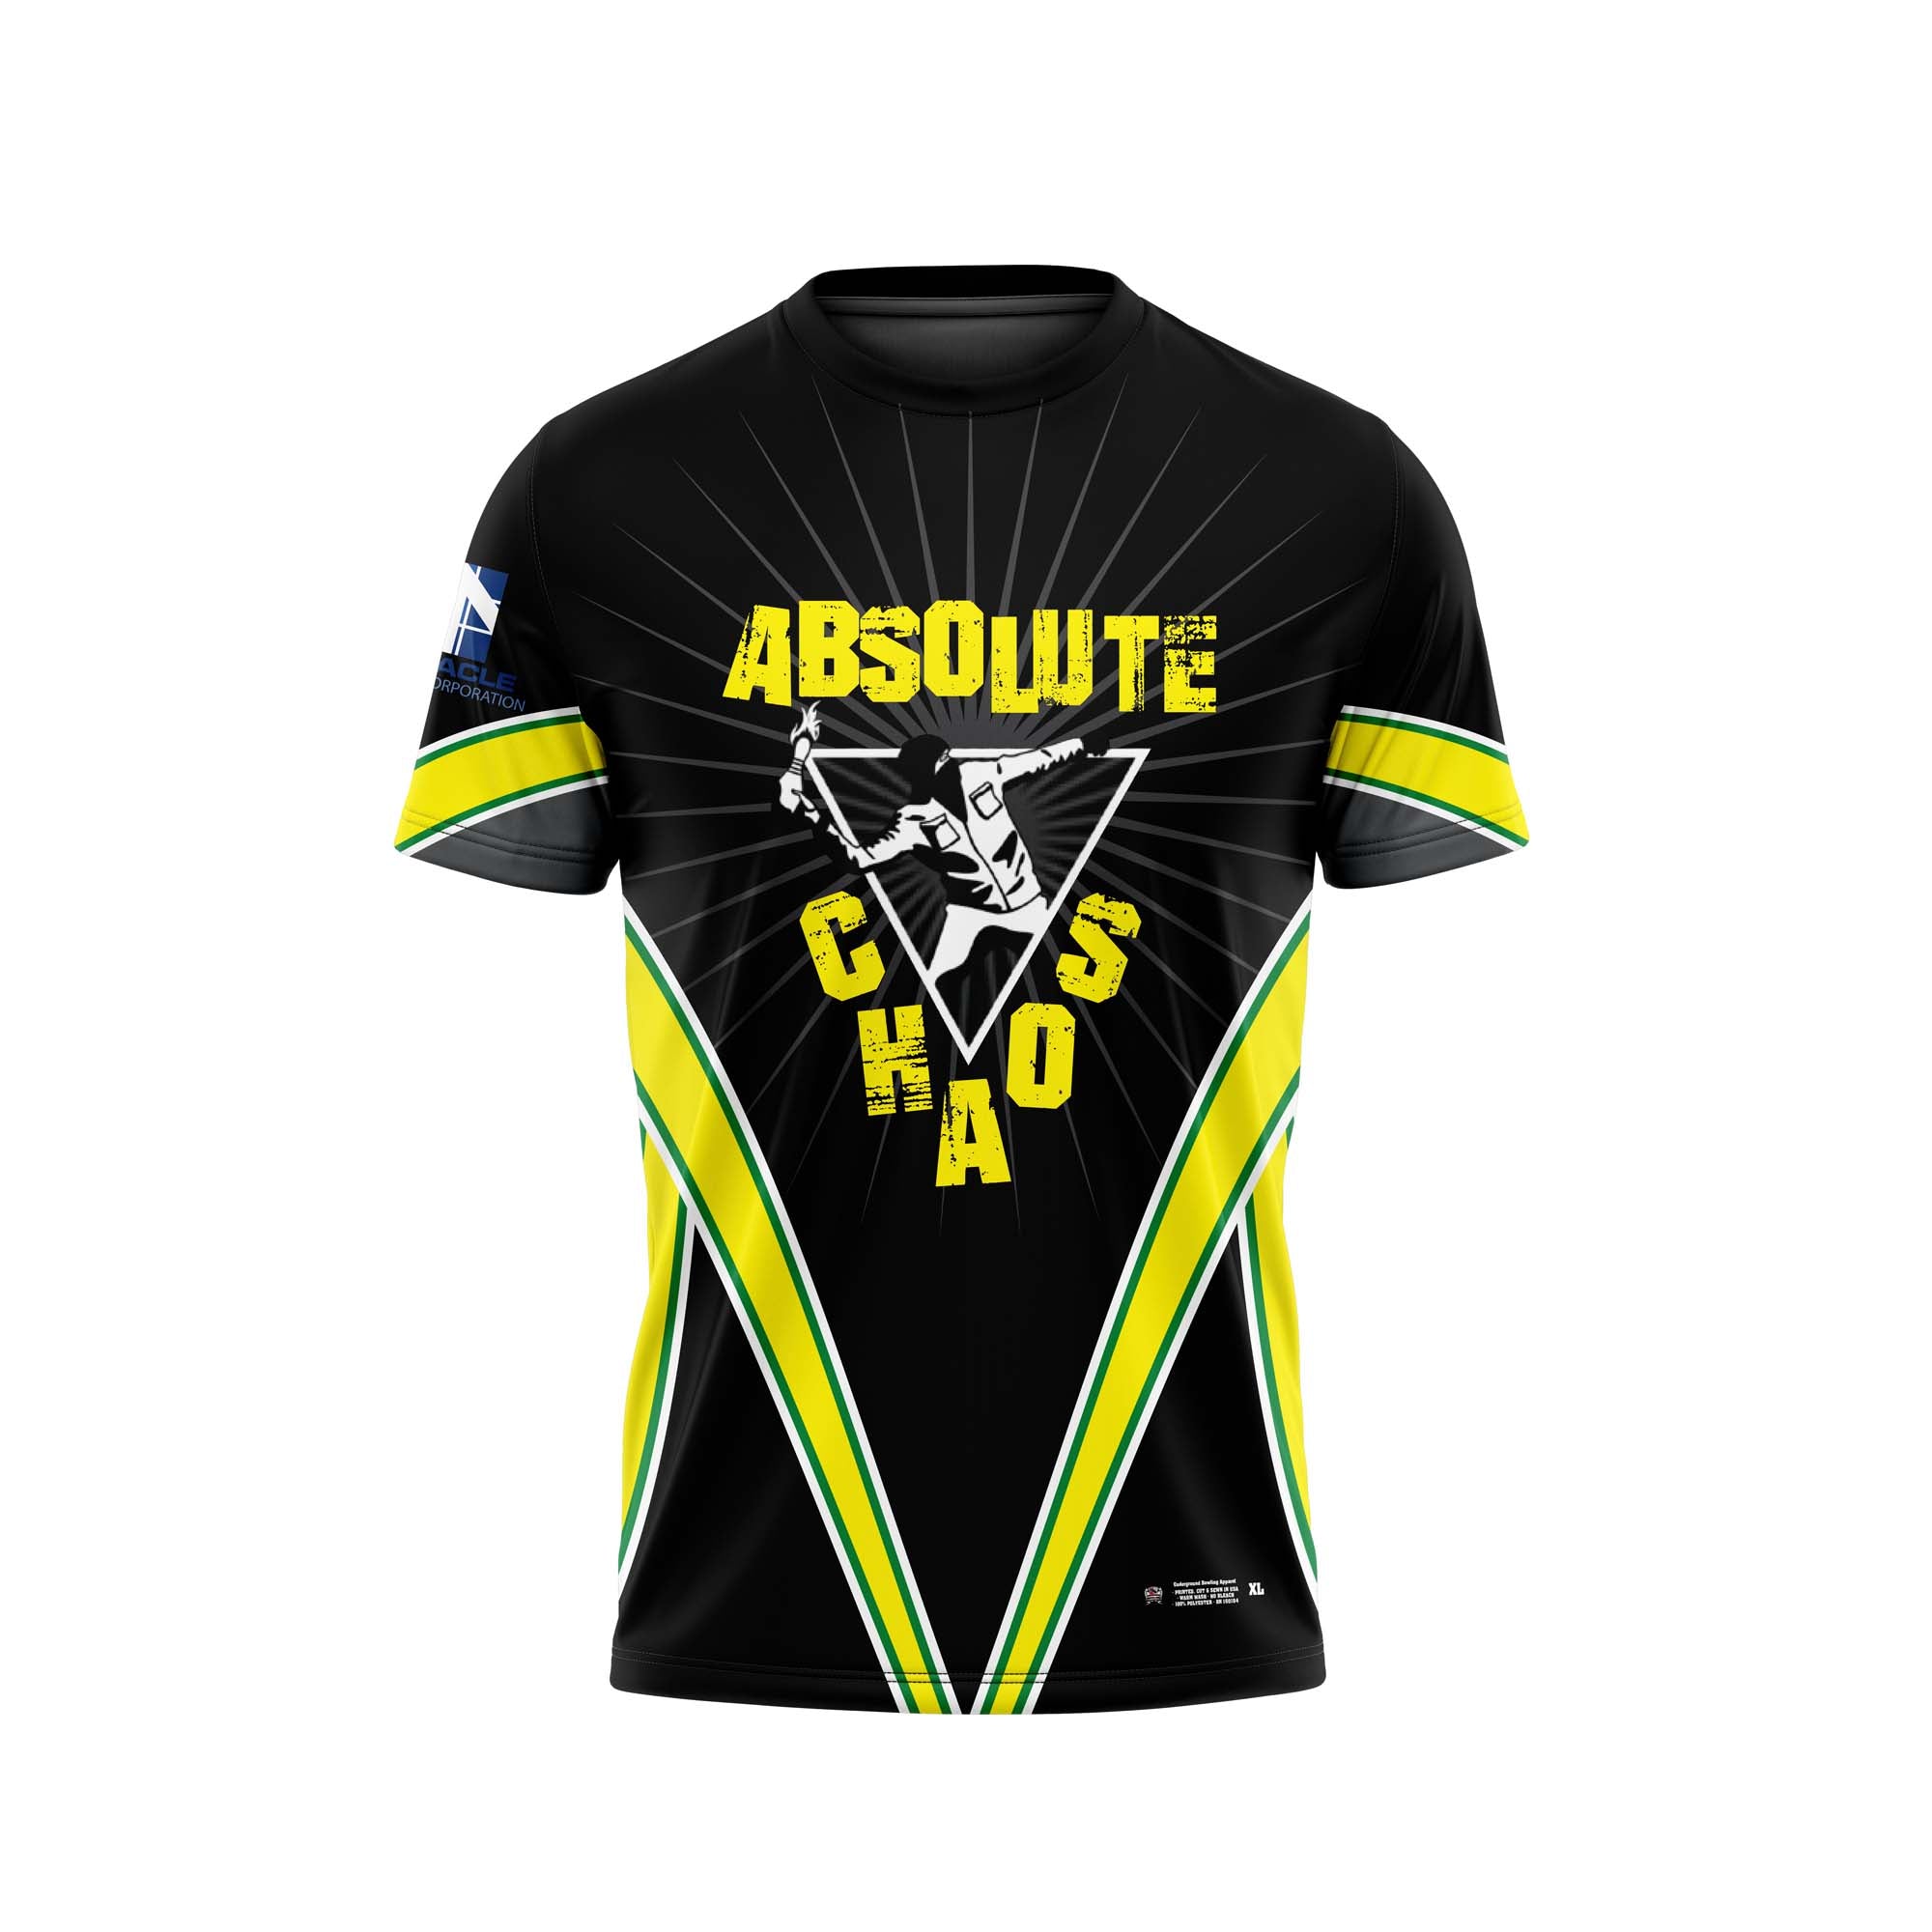 Absolute Chaos Home Jerseys